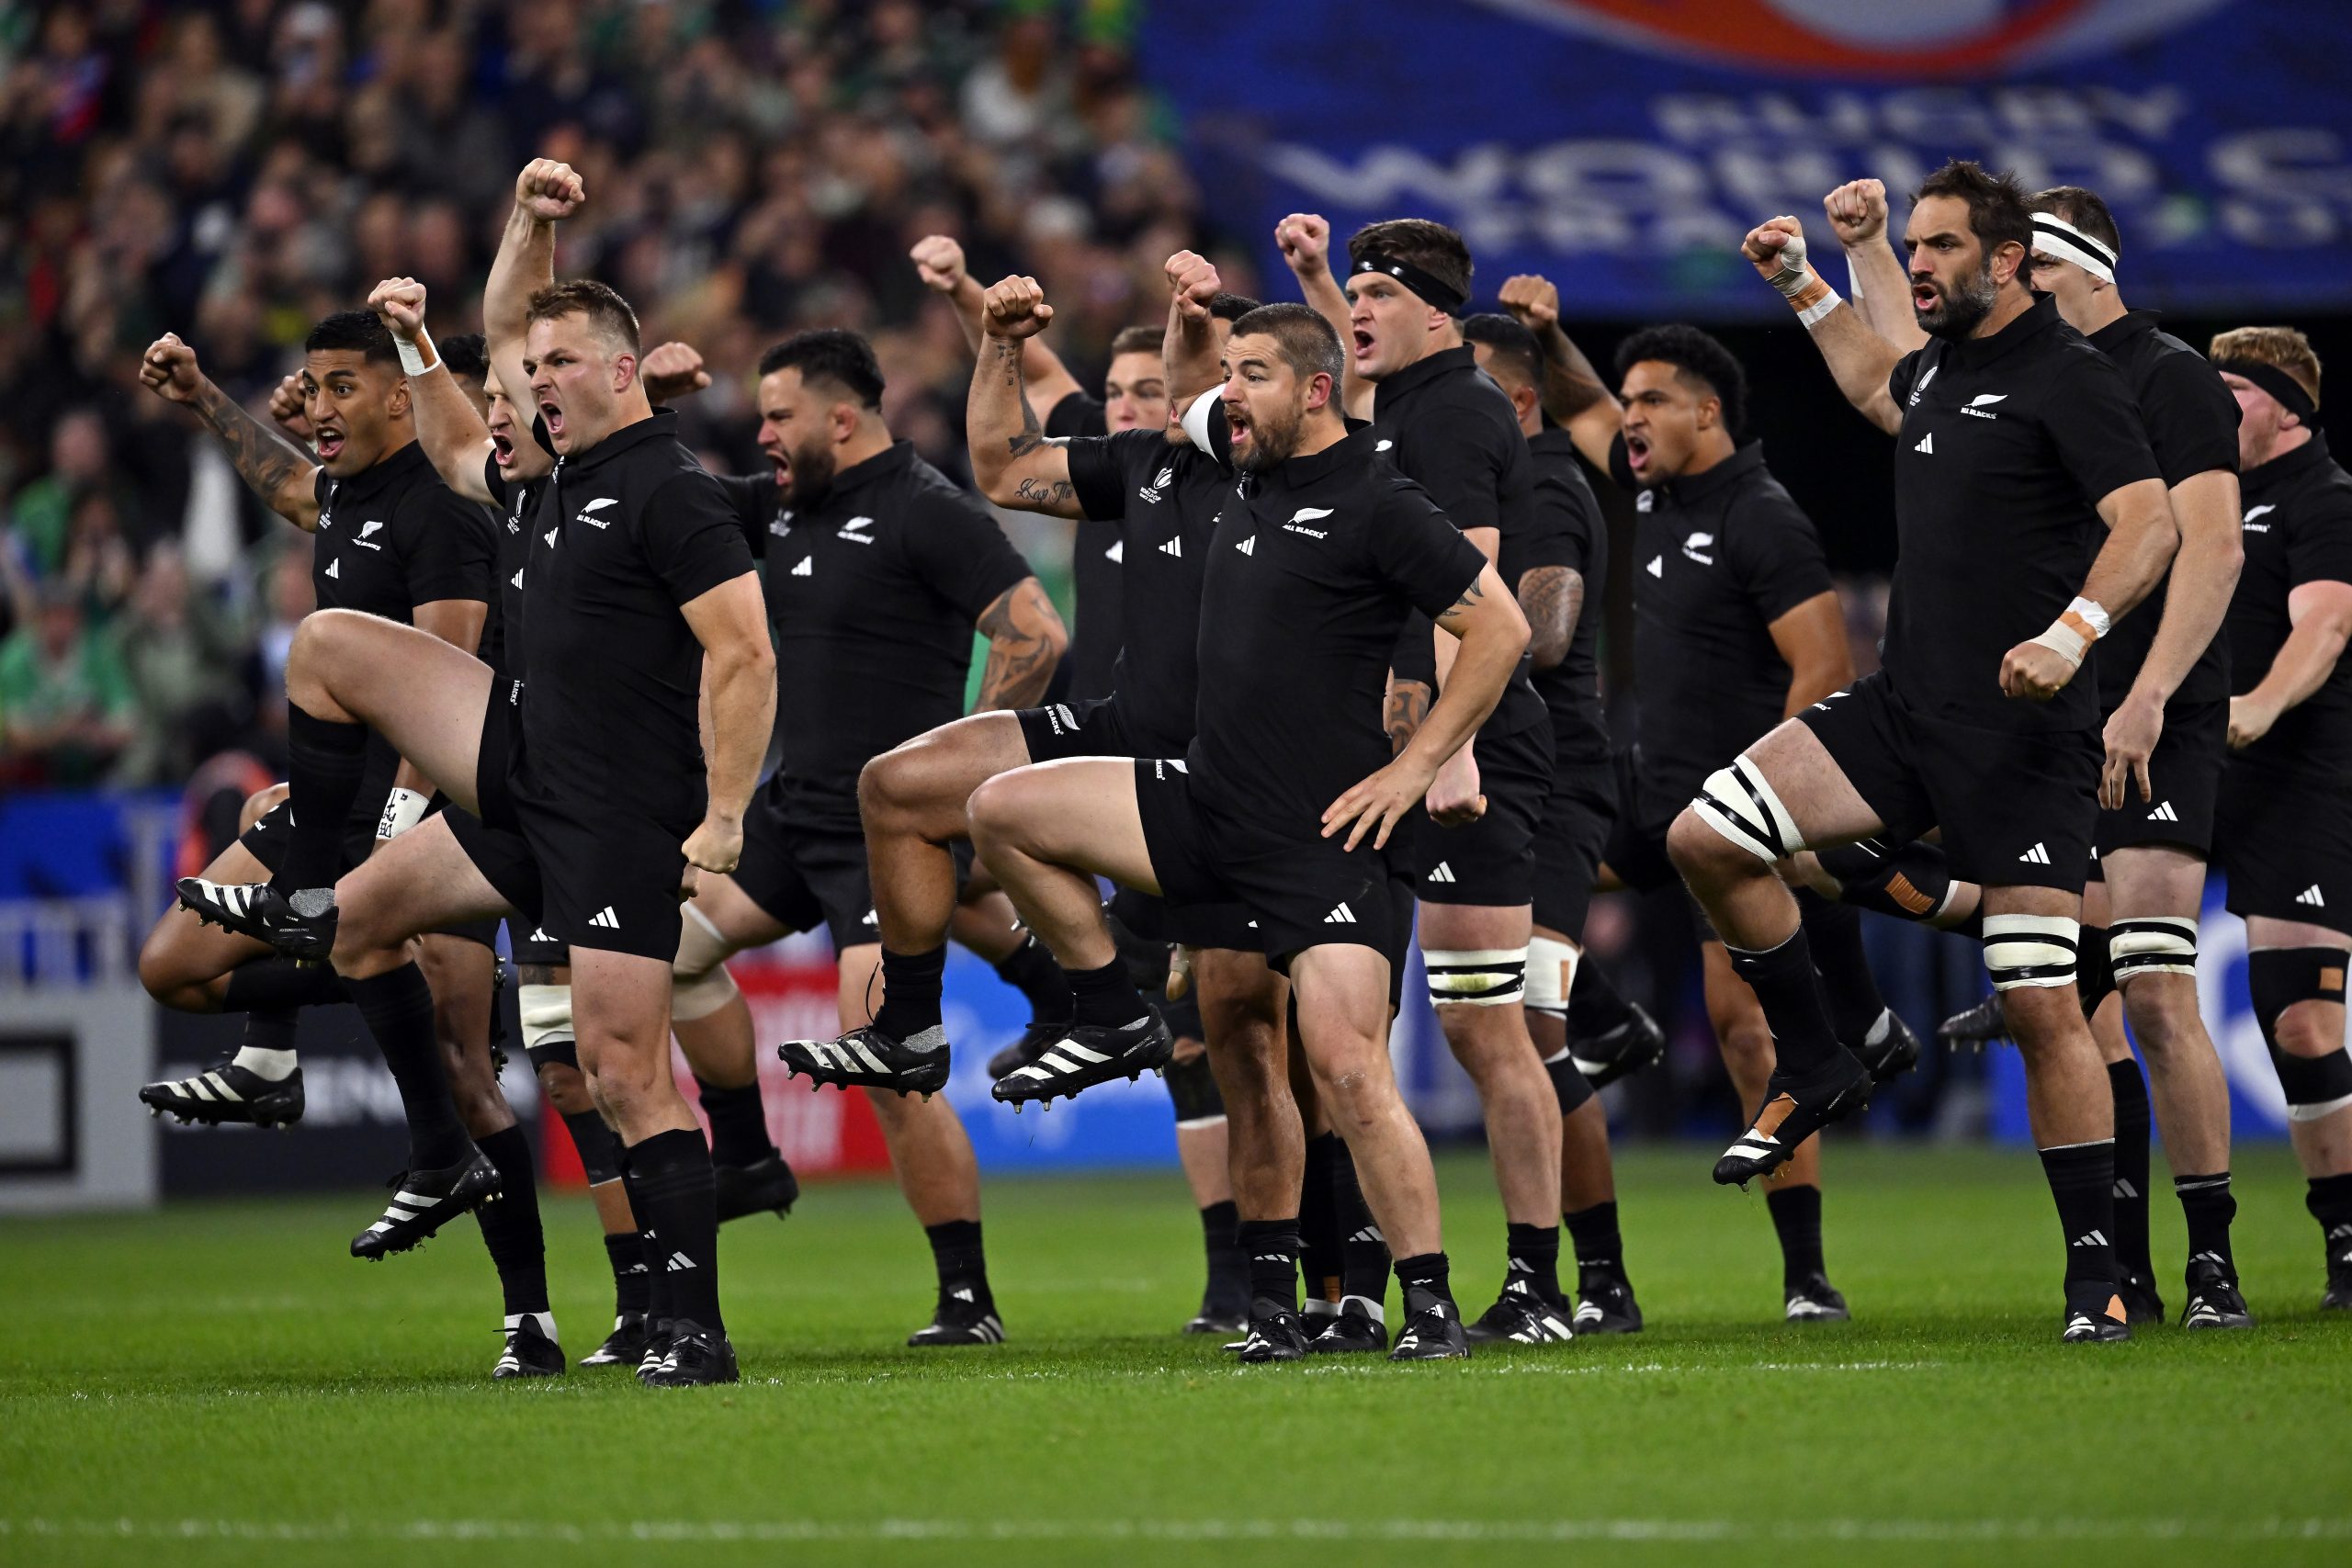 What is New Zealand’s national anthem and what does it mean?